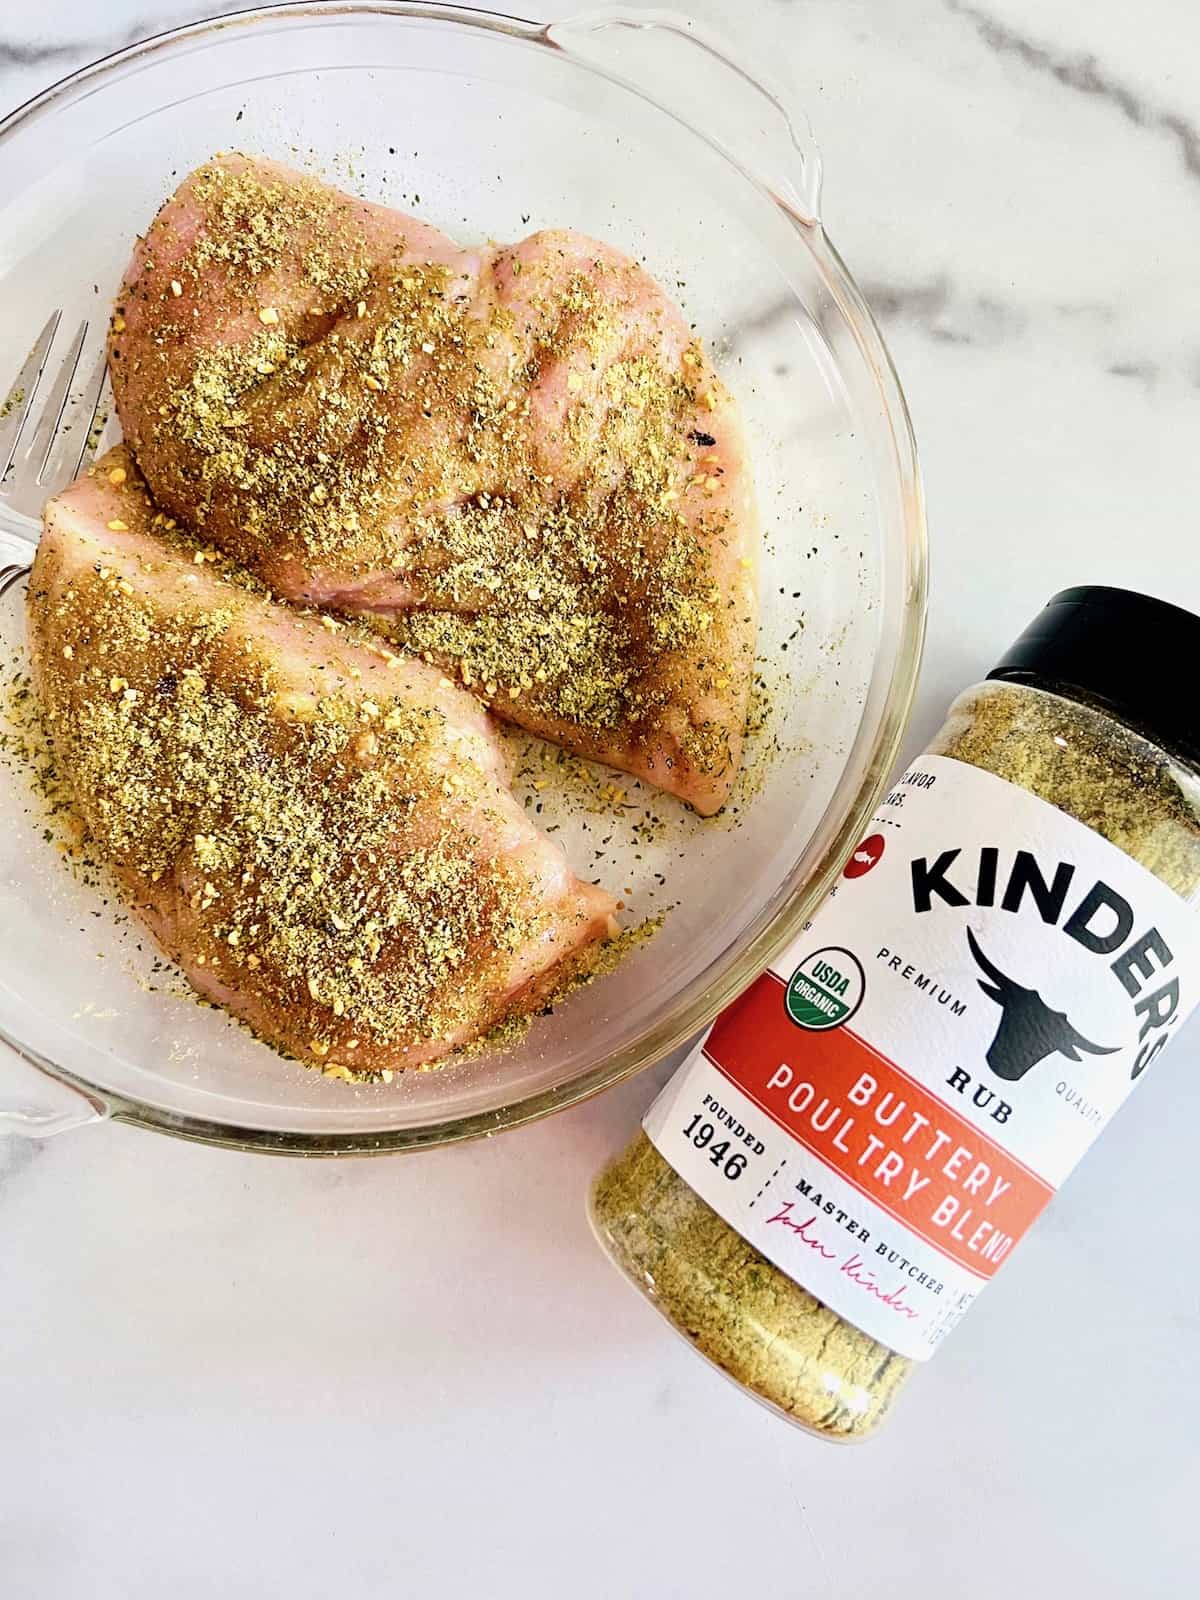 Seasoning blend rubbed on the raw boneless skinless chicken breasts.